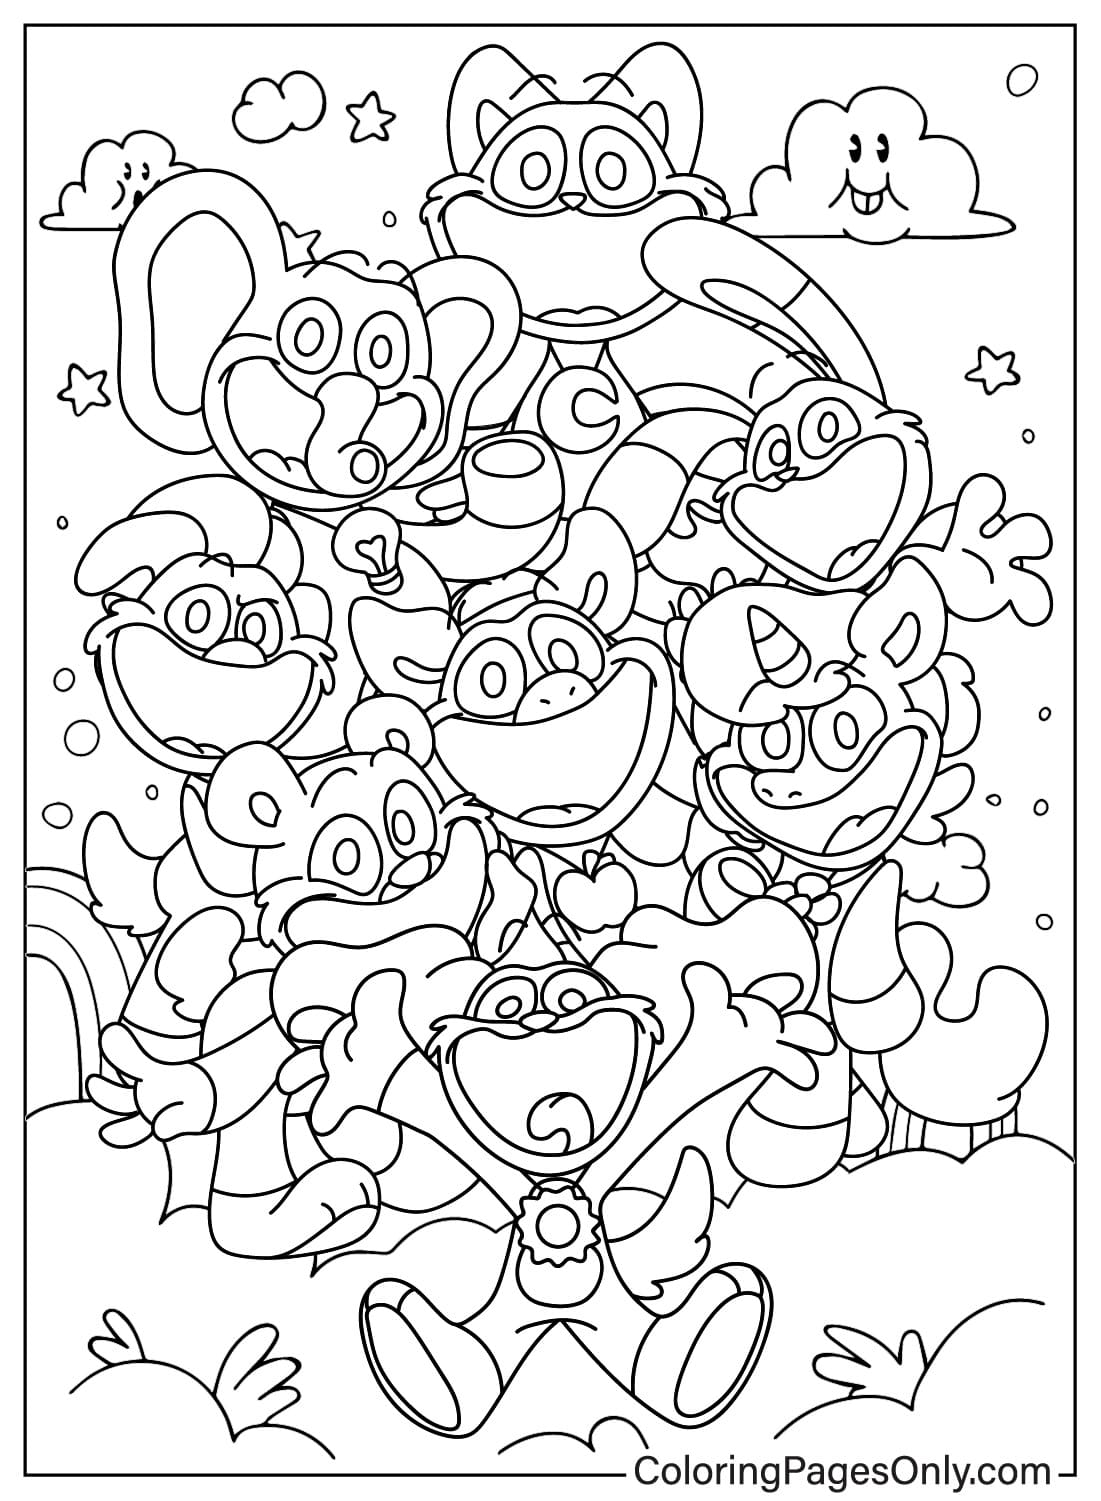 Free Smiling Critters Coloring Page - Free Printable Coloring Pages